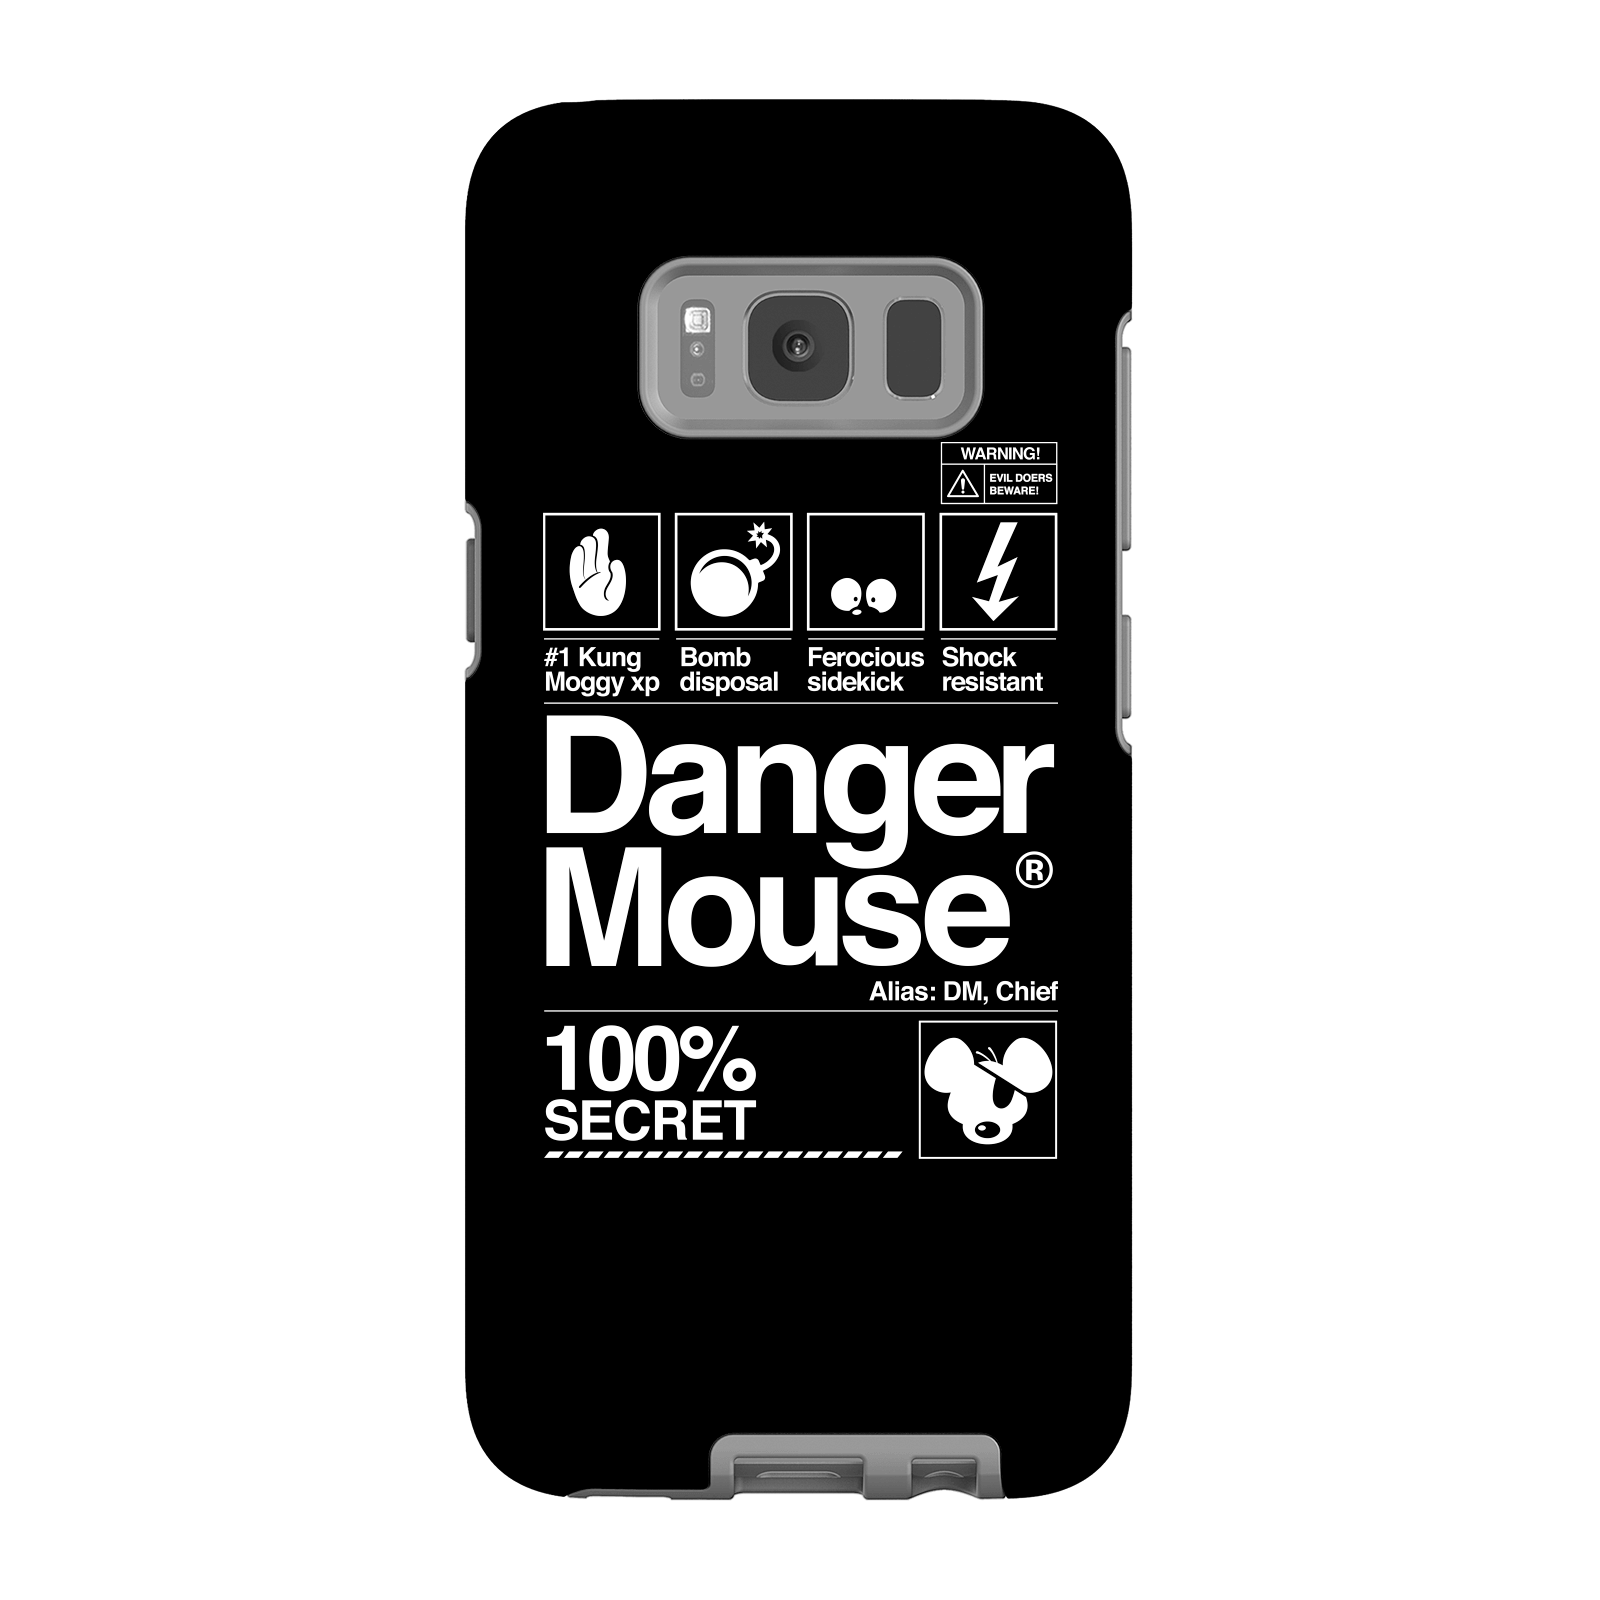 Danger Mouse 100% Secret Phone Case for iPhone and Android - Samsung S8 - Tough Case - Gloss